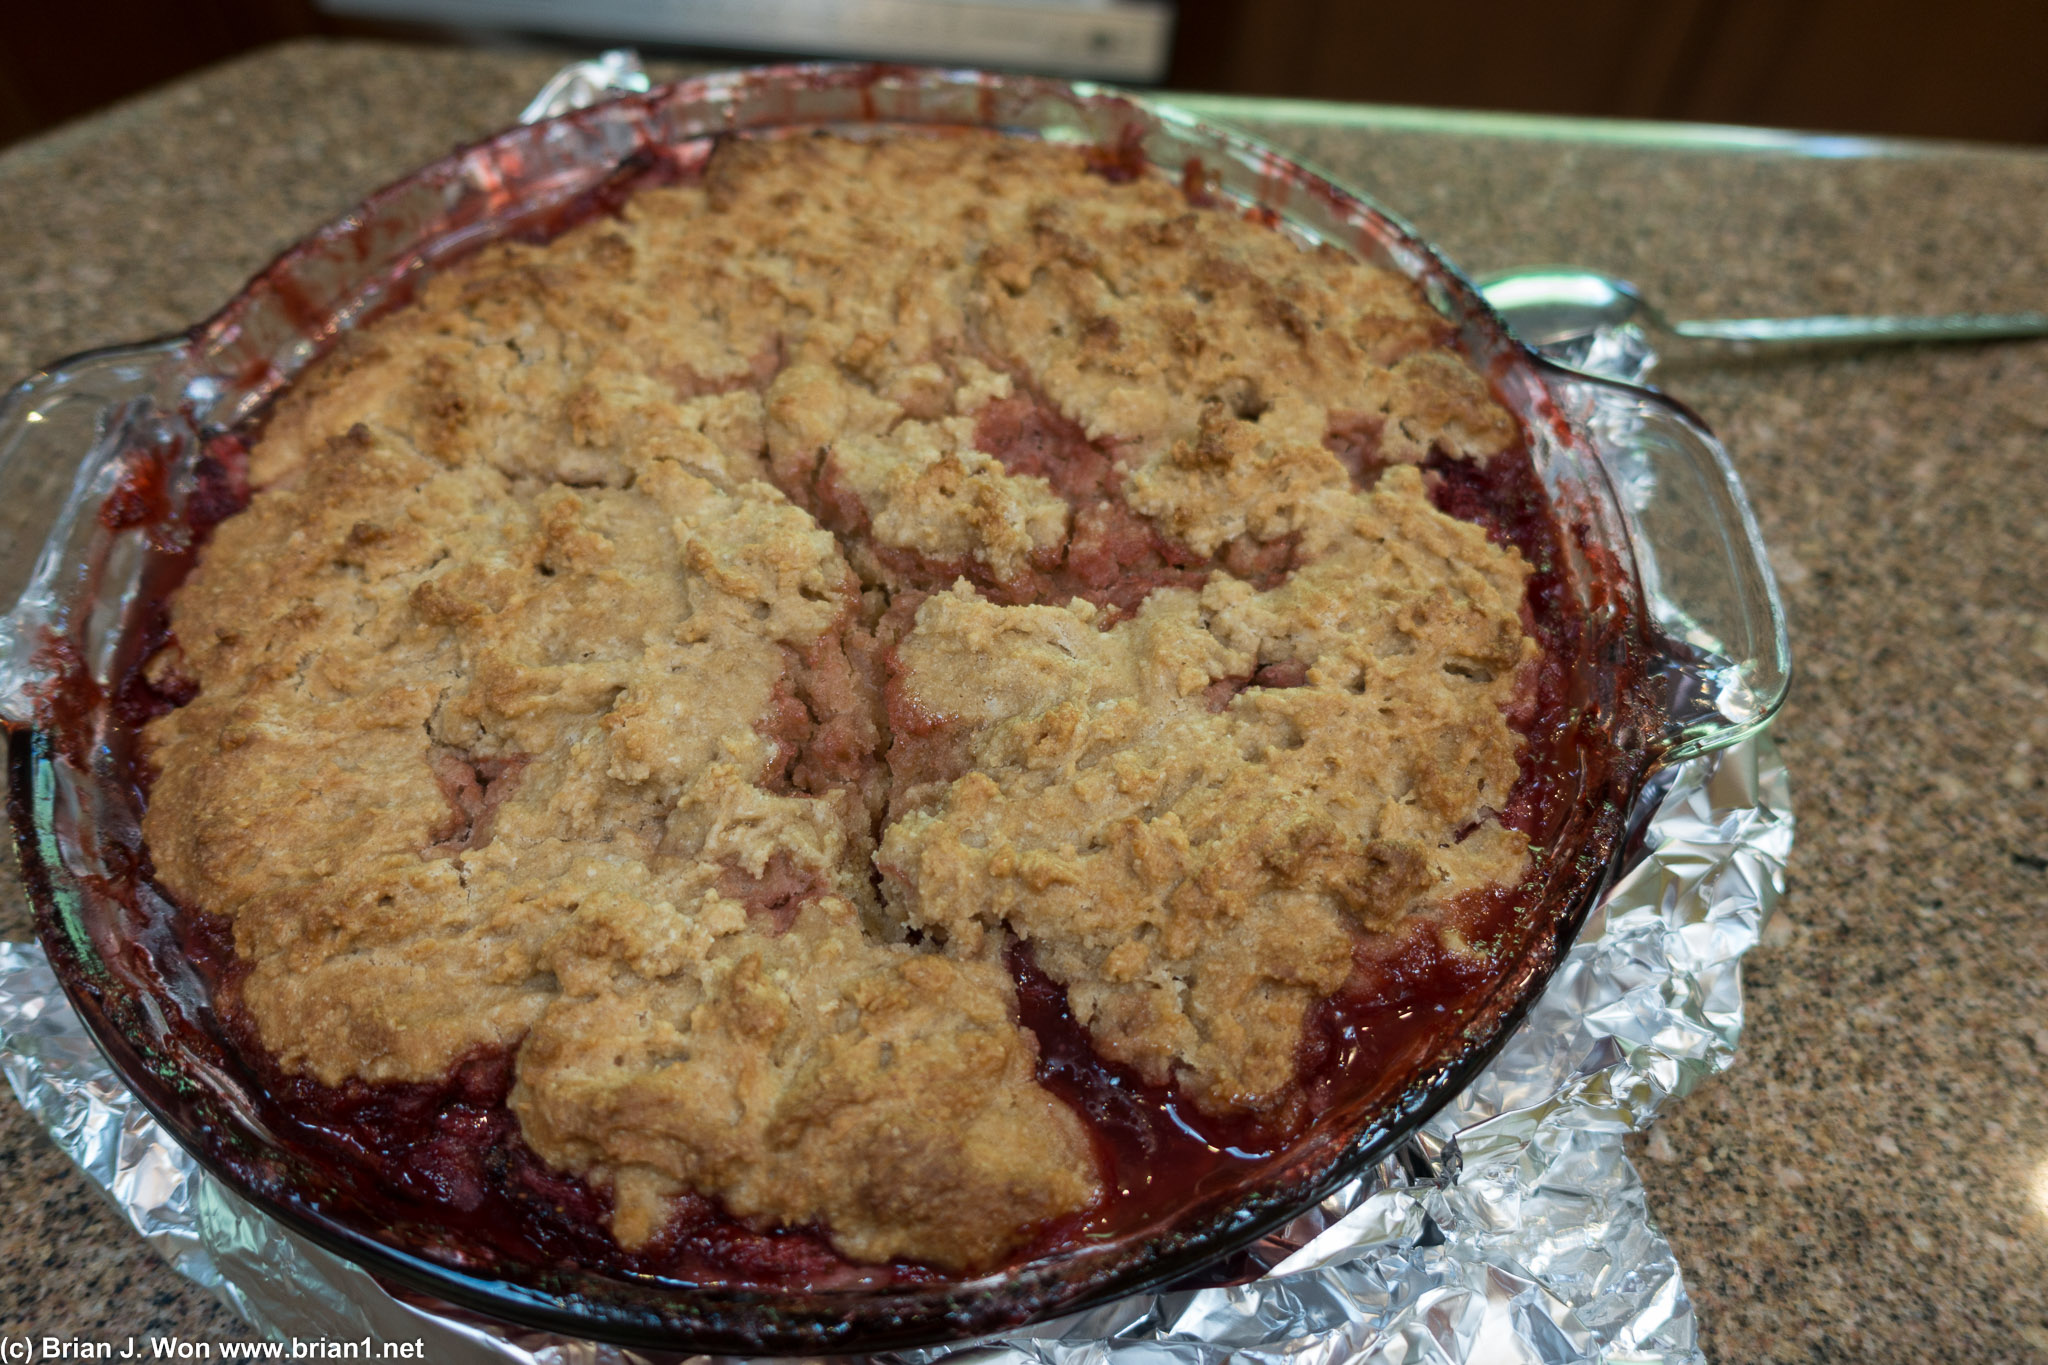 Carley and Sonho's strawberry cobbler.